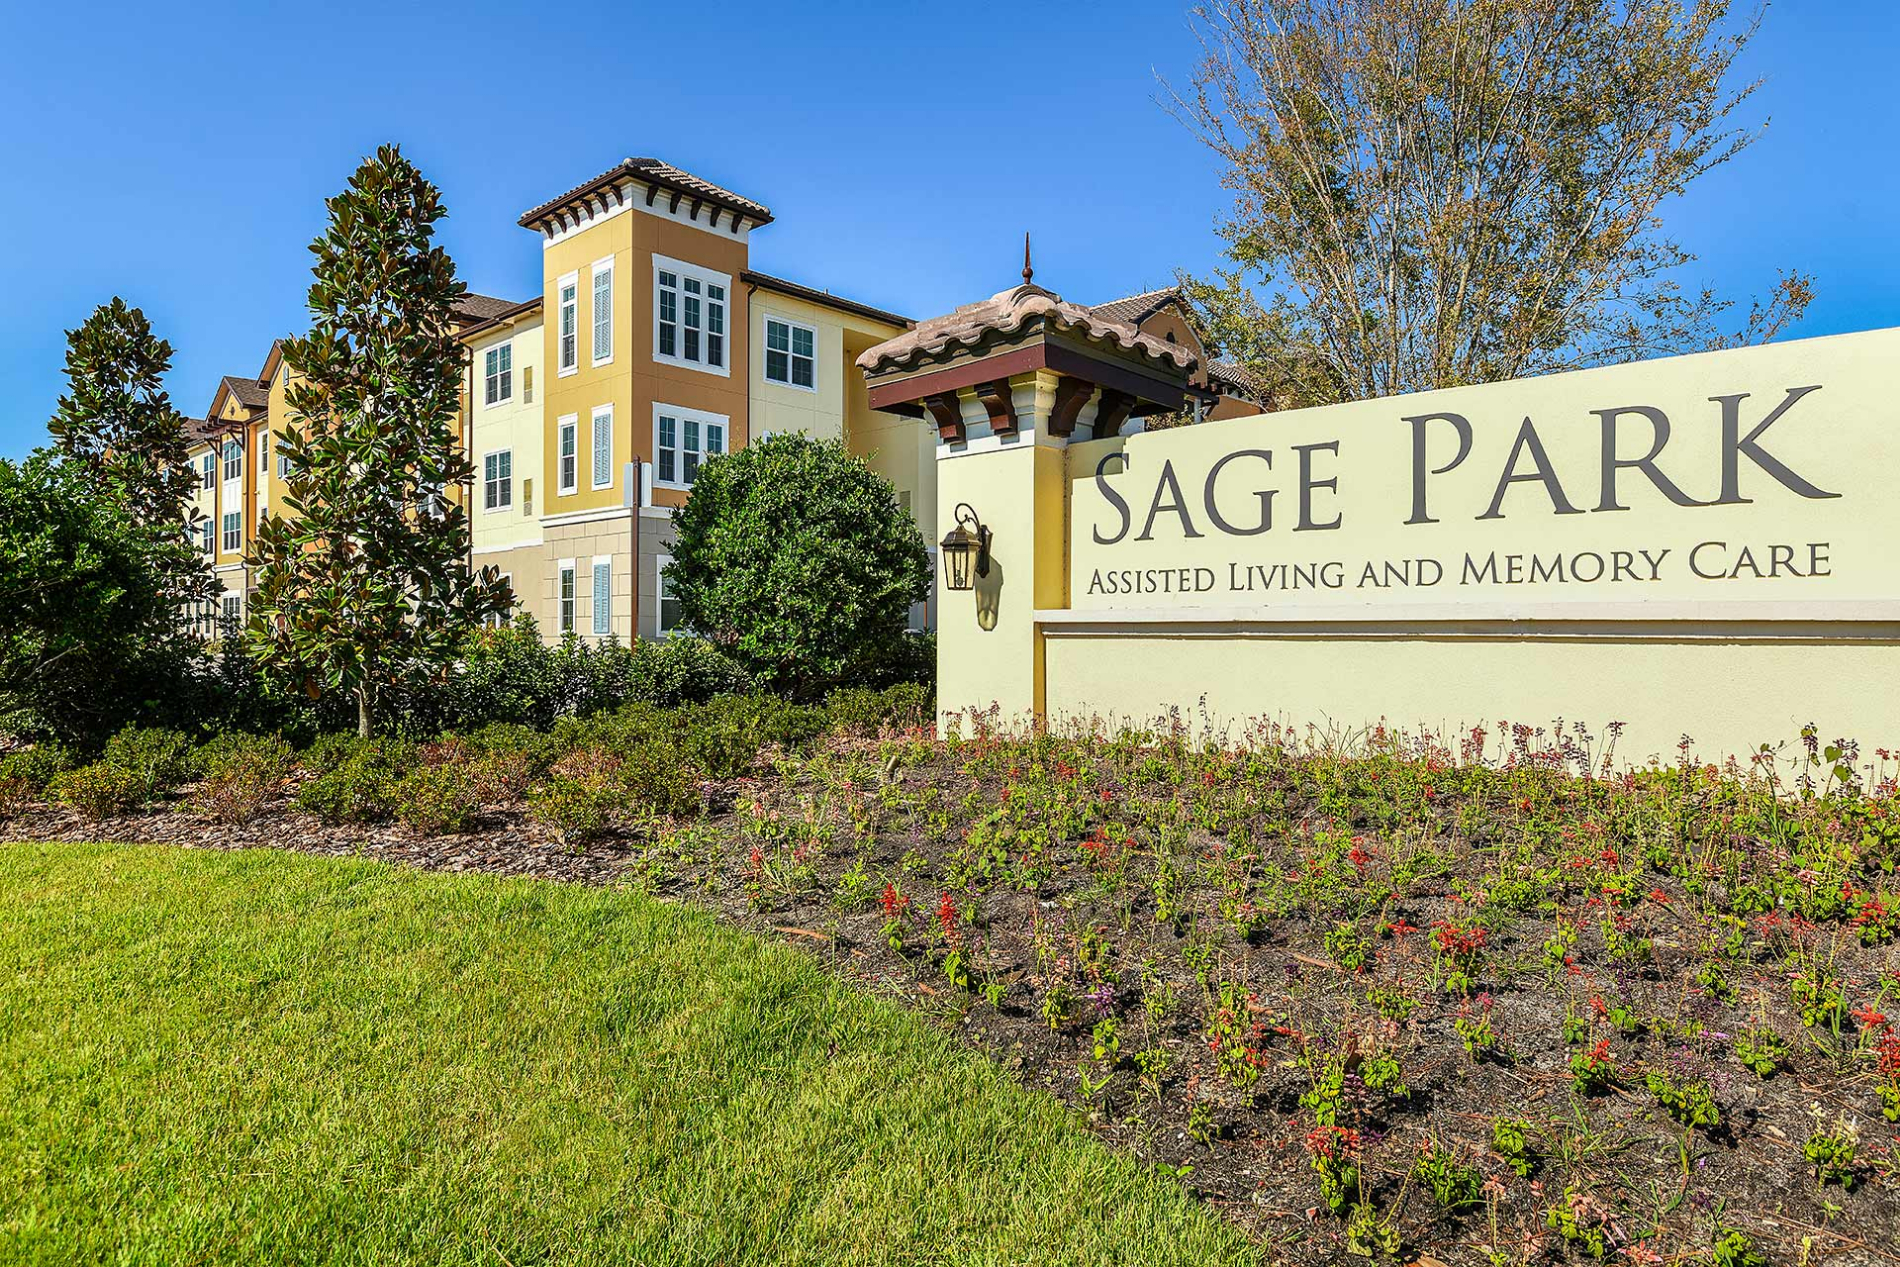 Sage Park Assisted Living and Memory Care